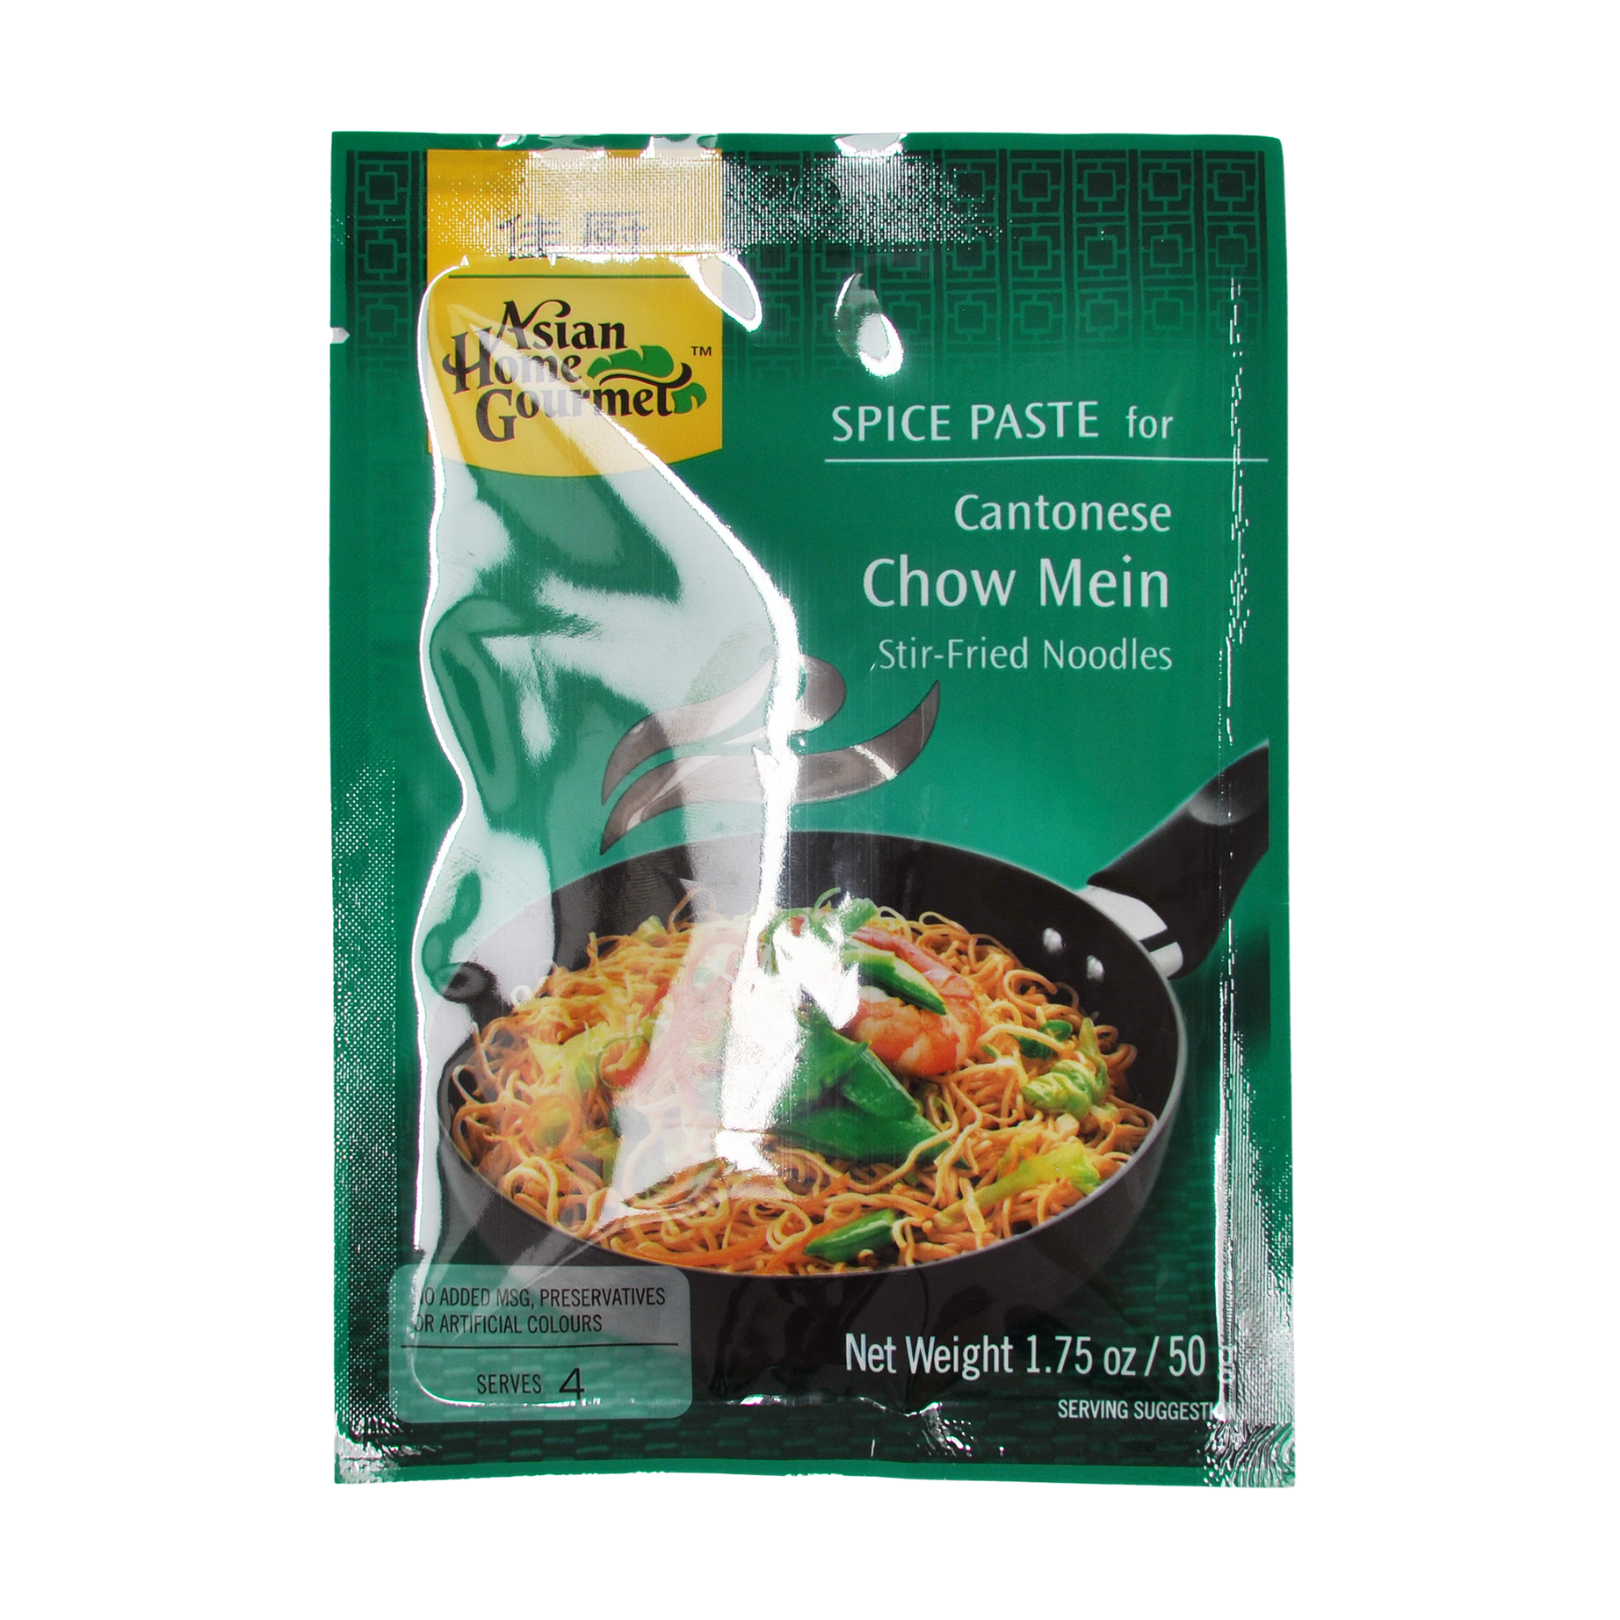 Cantonese Chow Mein Stir Fry Noodles Spice Paste 50g by AHG